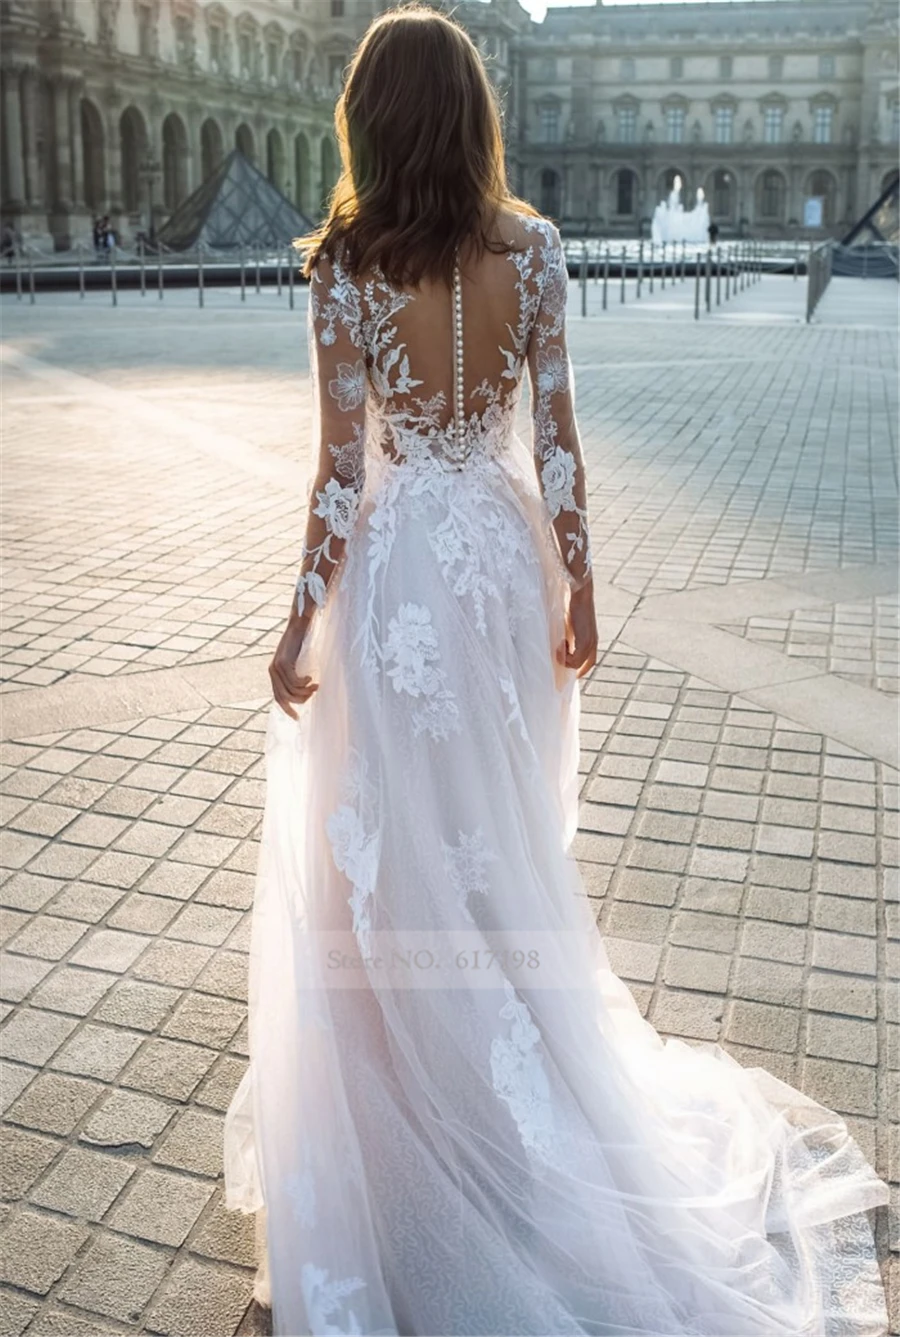 Forventning Opdagelse biograf Gorgeous Lace Applique See Through Blush Lace Long Sleeves Wedding Dress  With Crystals Sexy Bridal Gowns - Wedding Dresses - AliExpress